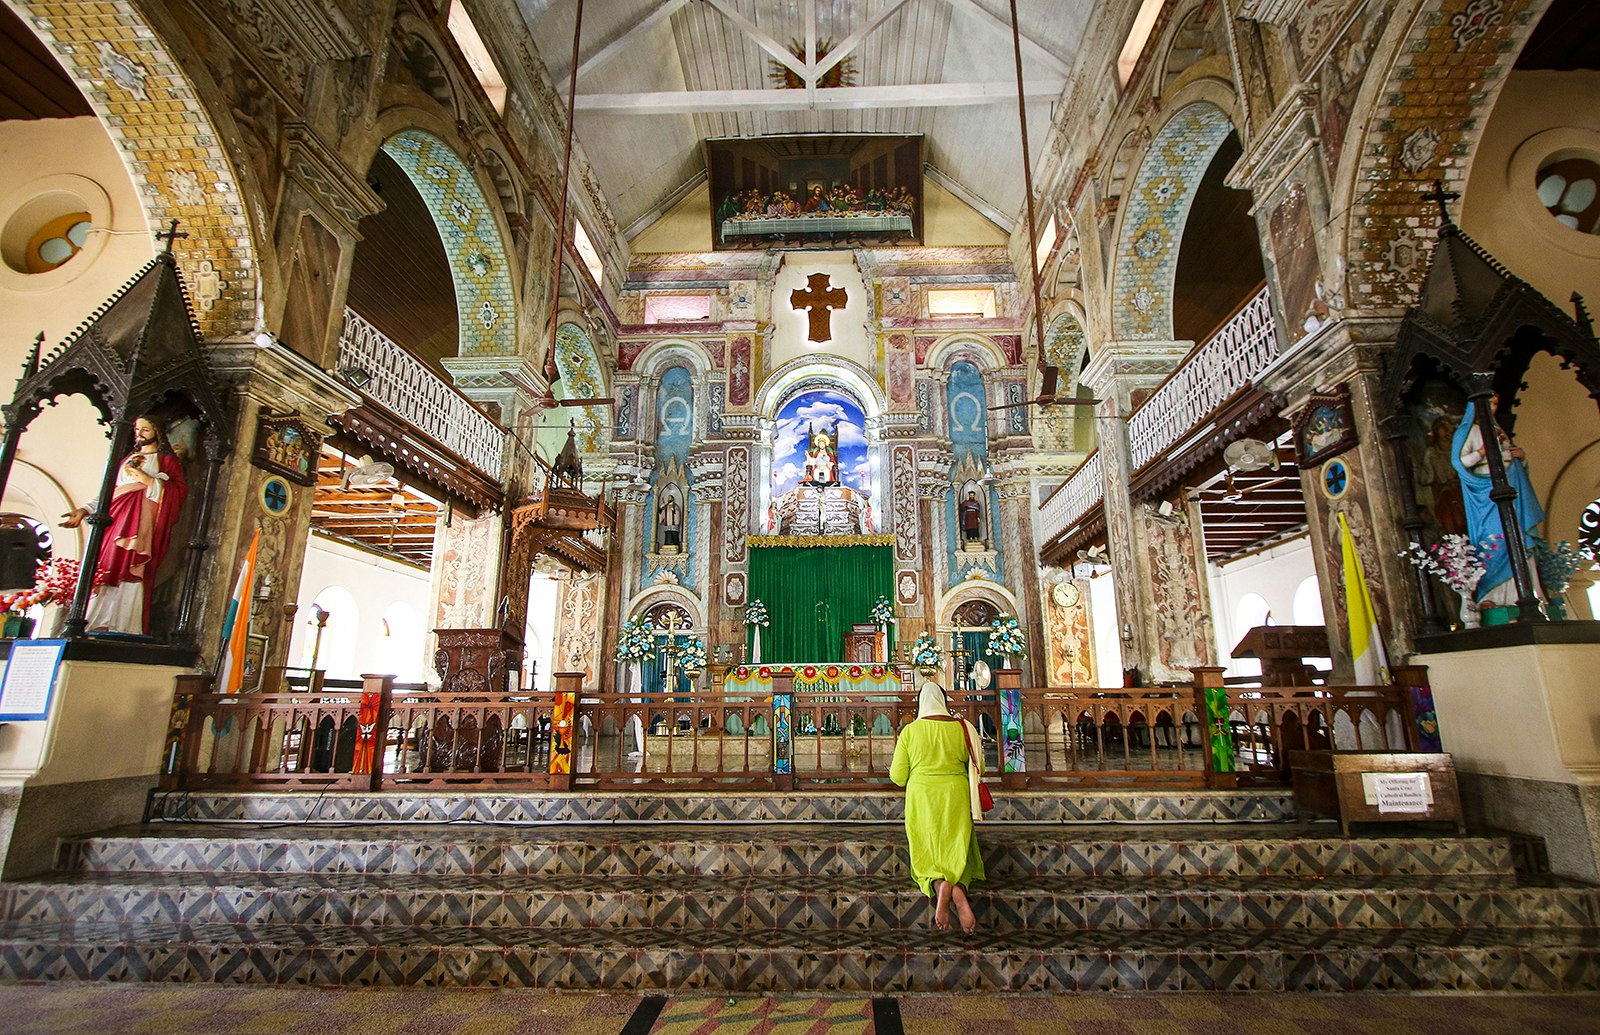 A woman in a chartreuse dress kneels at the alter of the historic St Francis Church in Kochi, India.